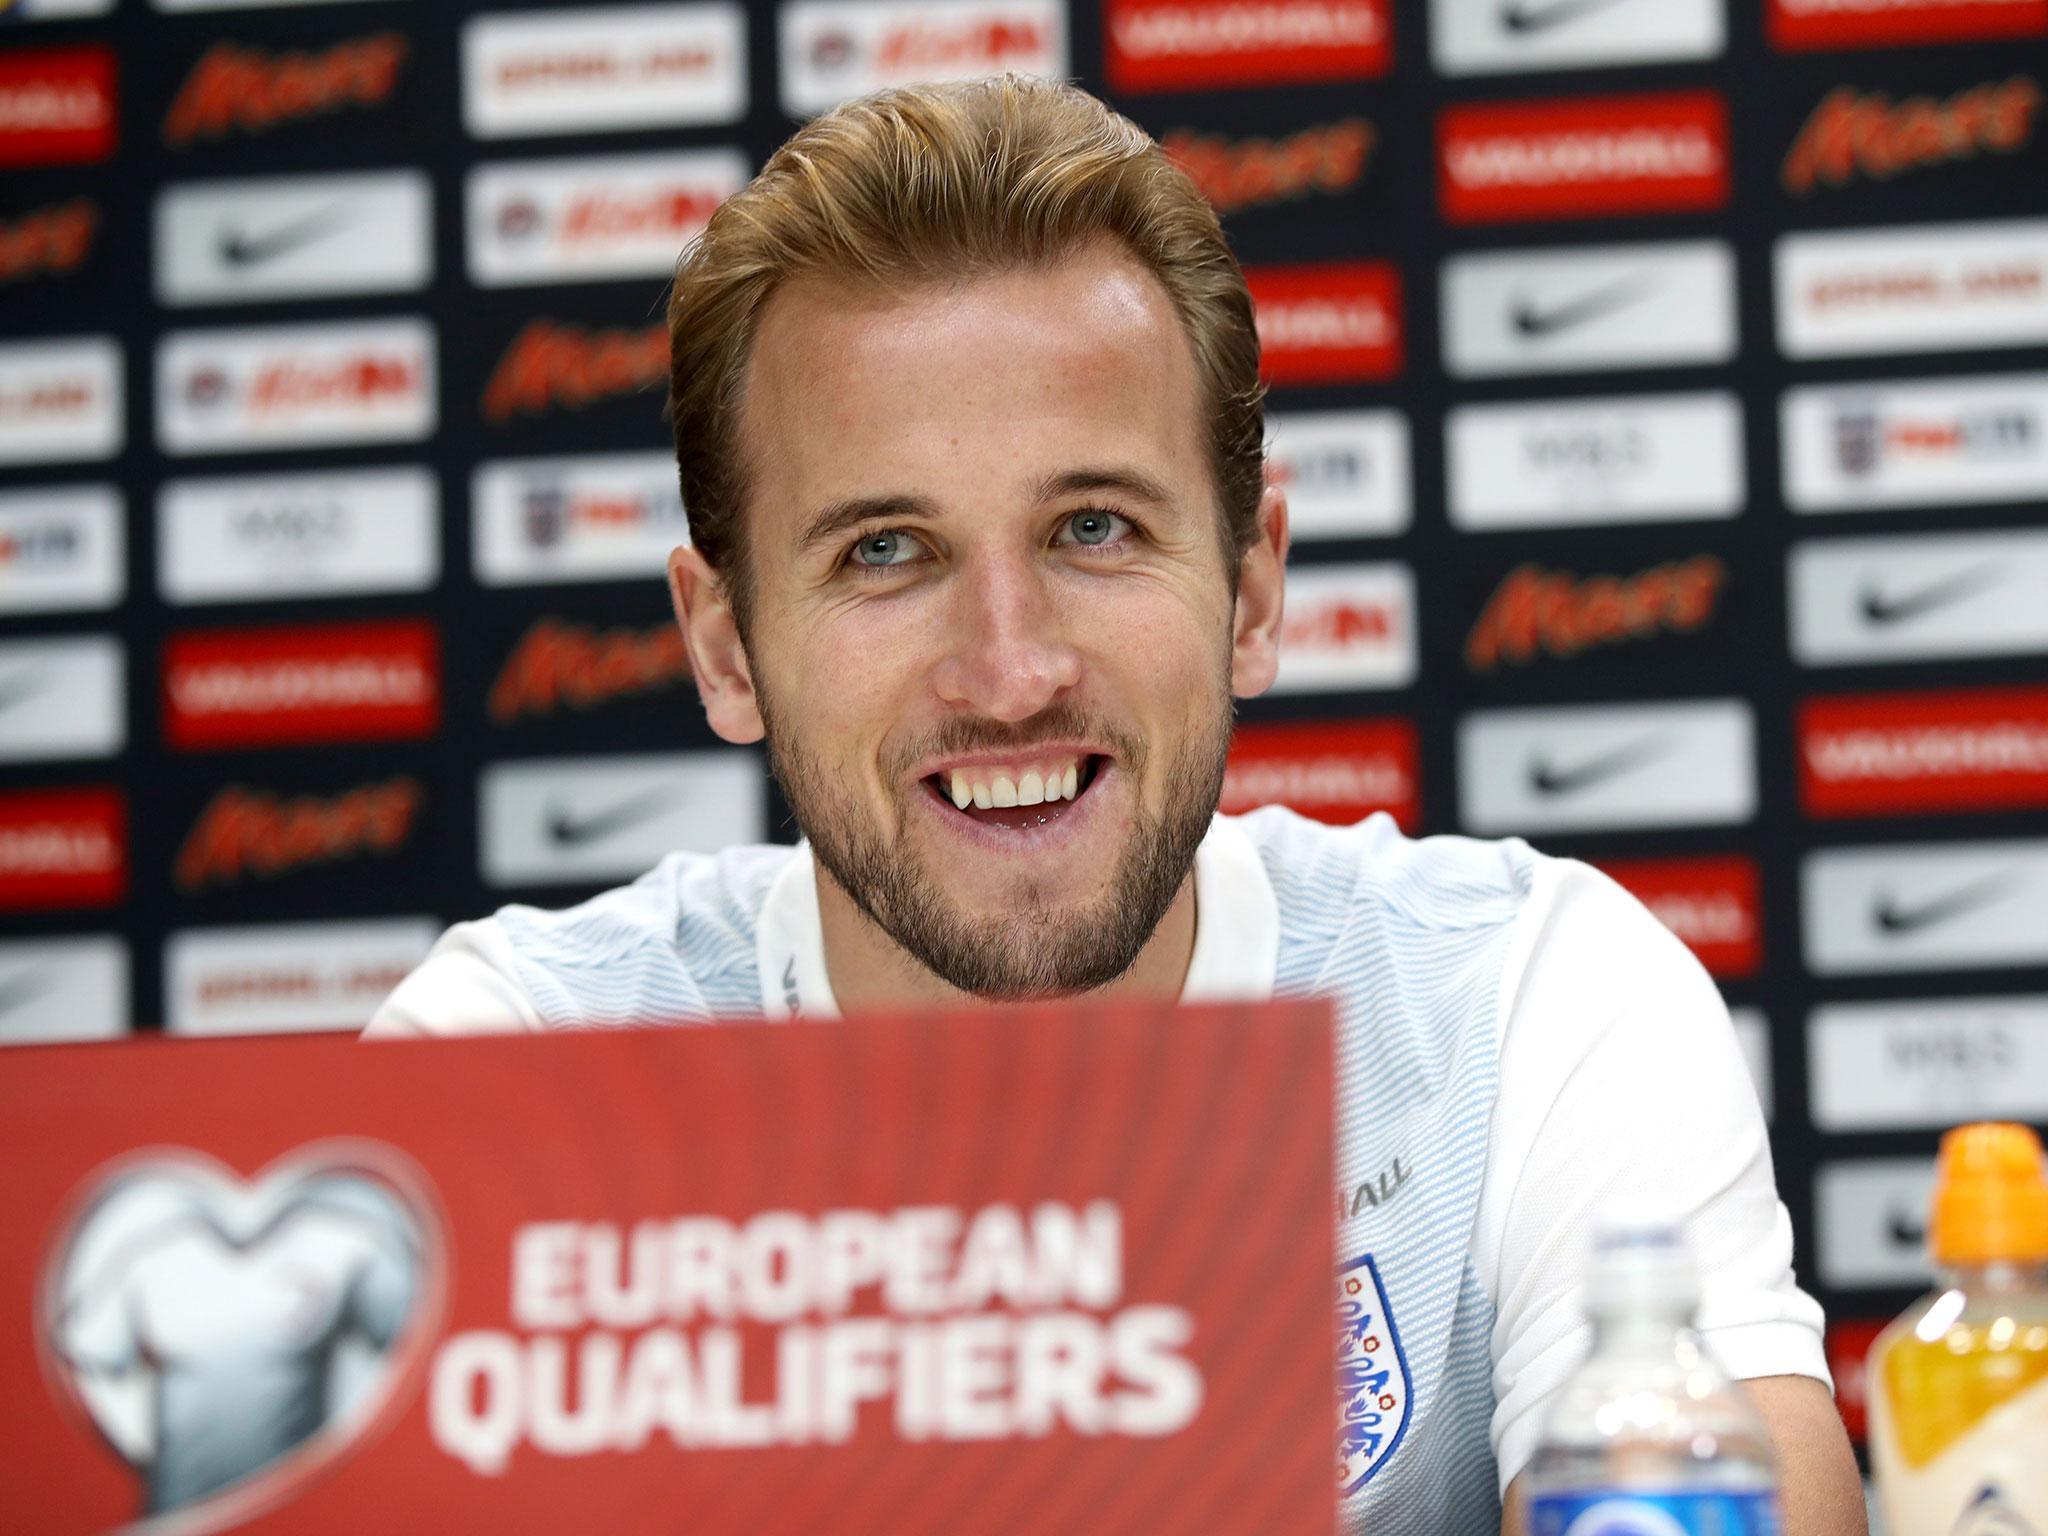 Harry Kane will wear the armband at Wembley on Thursday evening